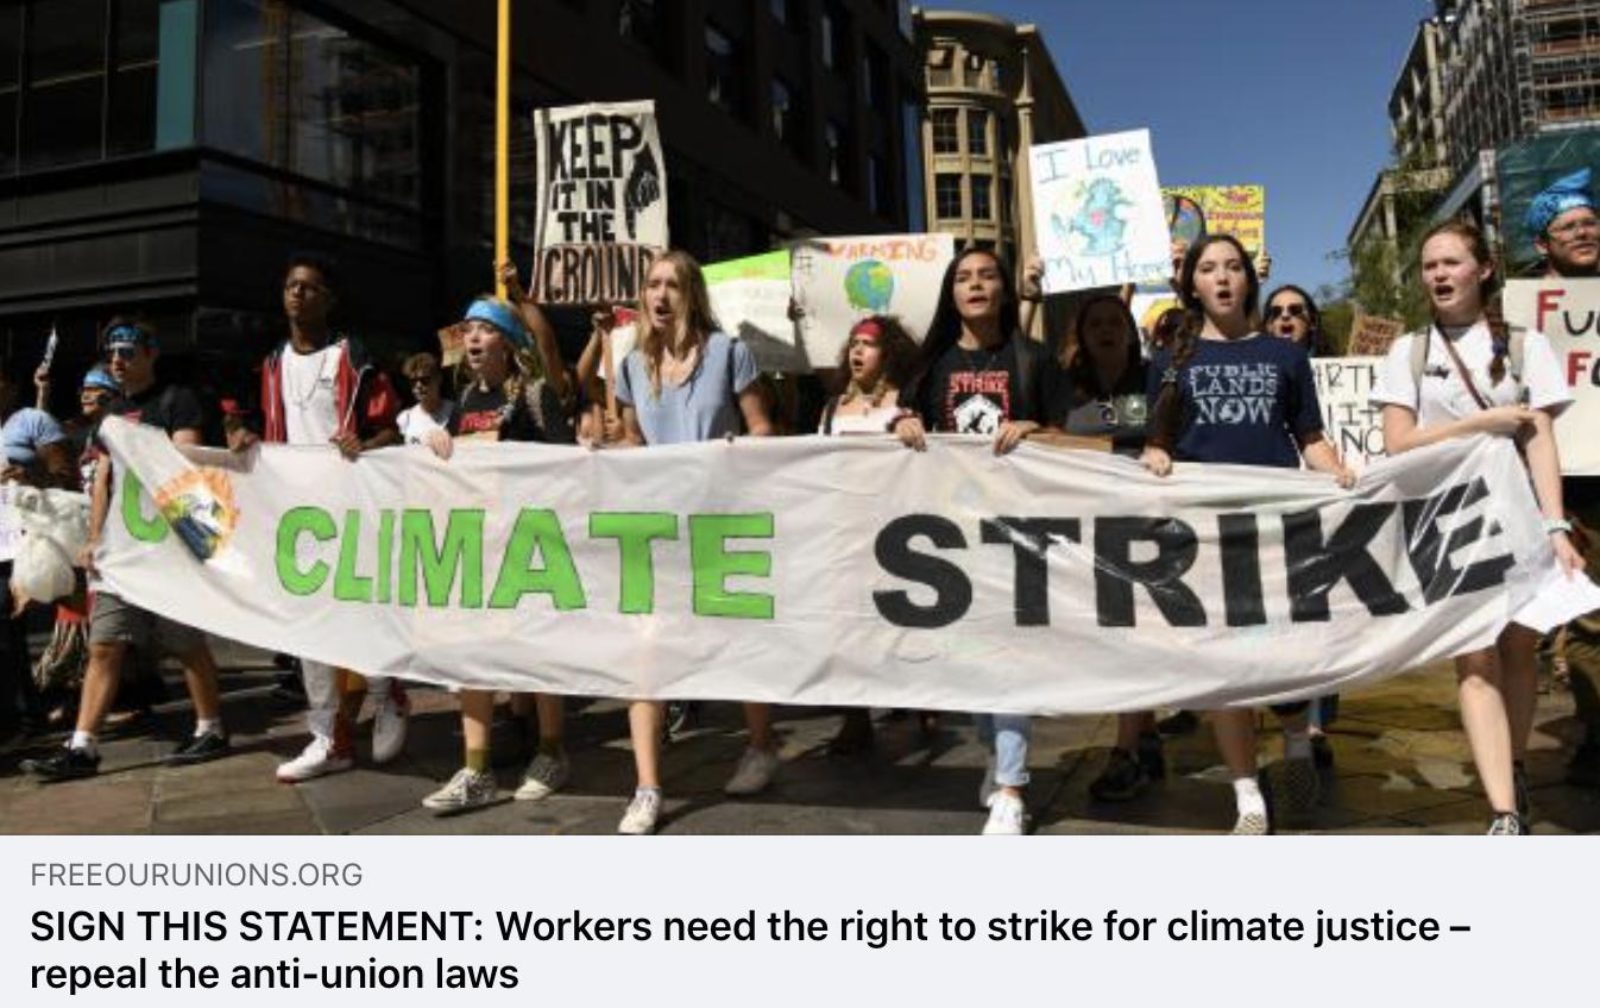 Image shows a groups of people marching and holding a banner which says "Climate Strike"